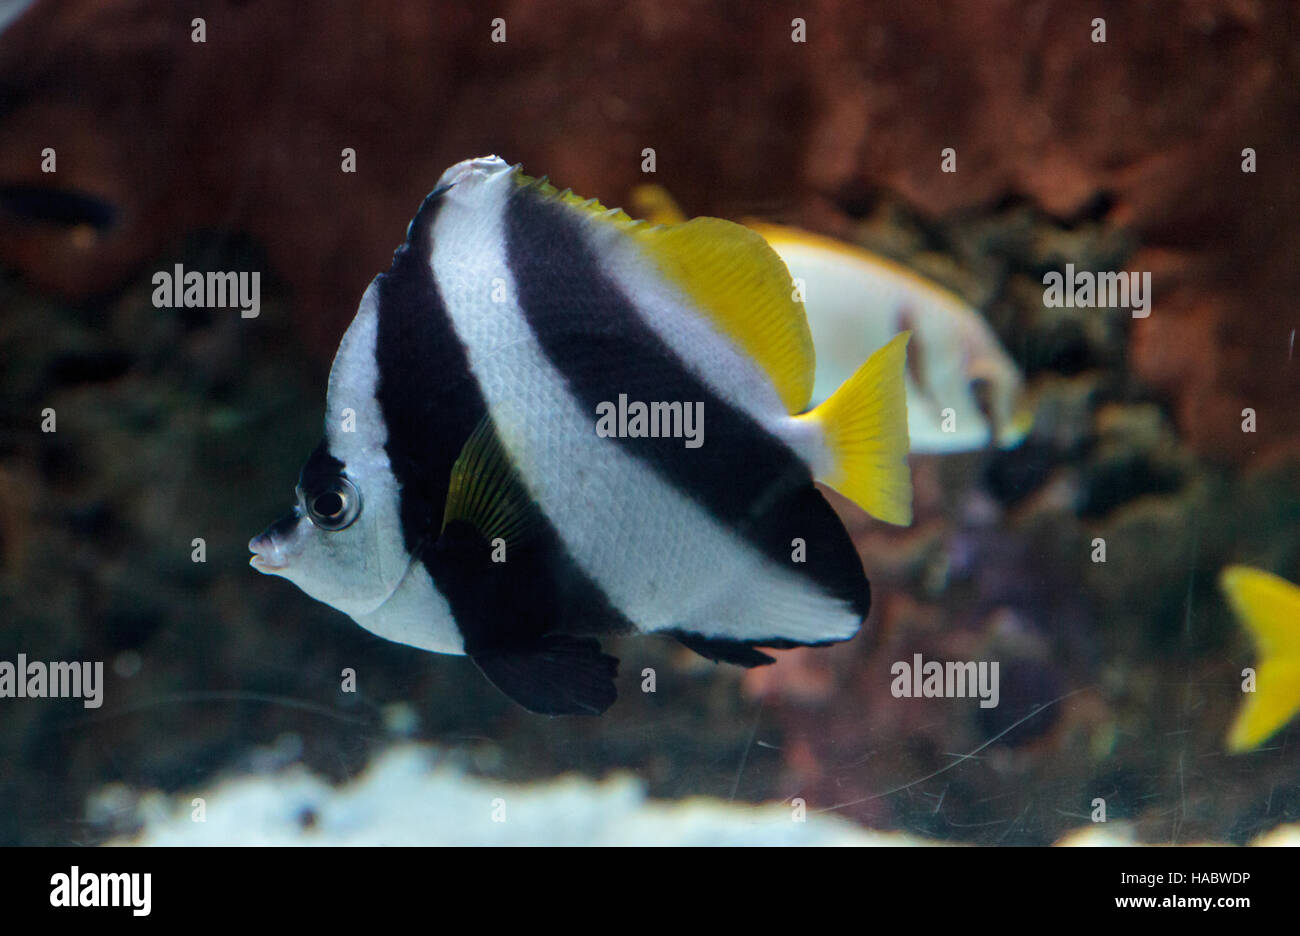 Pennant Butterflyfish Heniochus acuminatus has black and white stripes with a yellow tail and larger eyes. Stock Photo